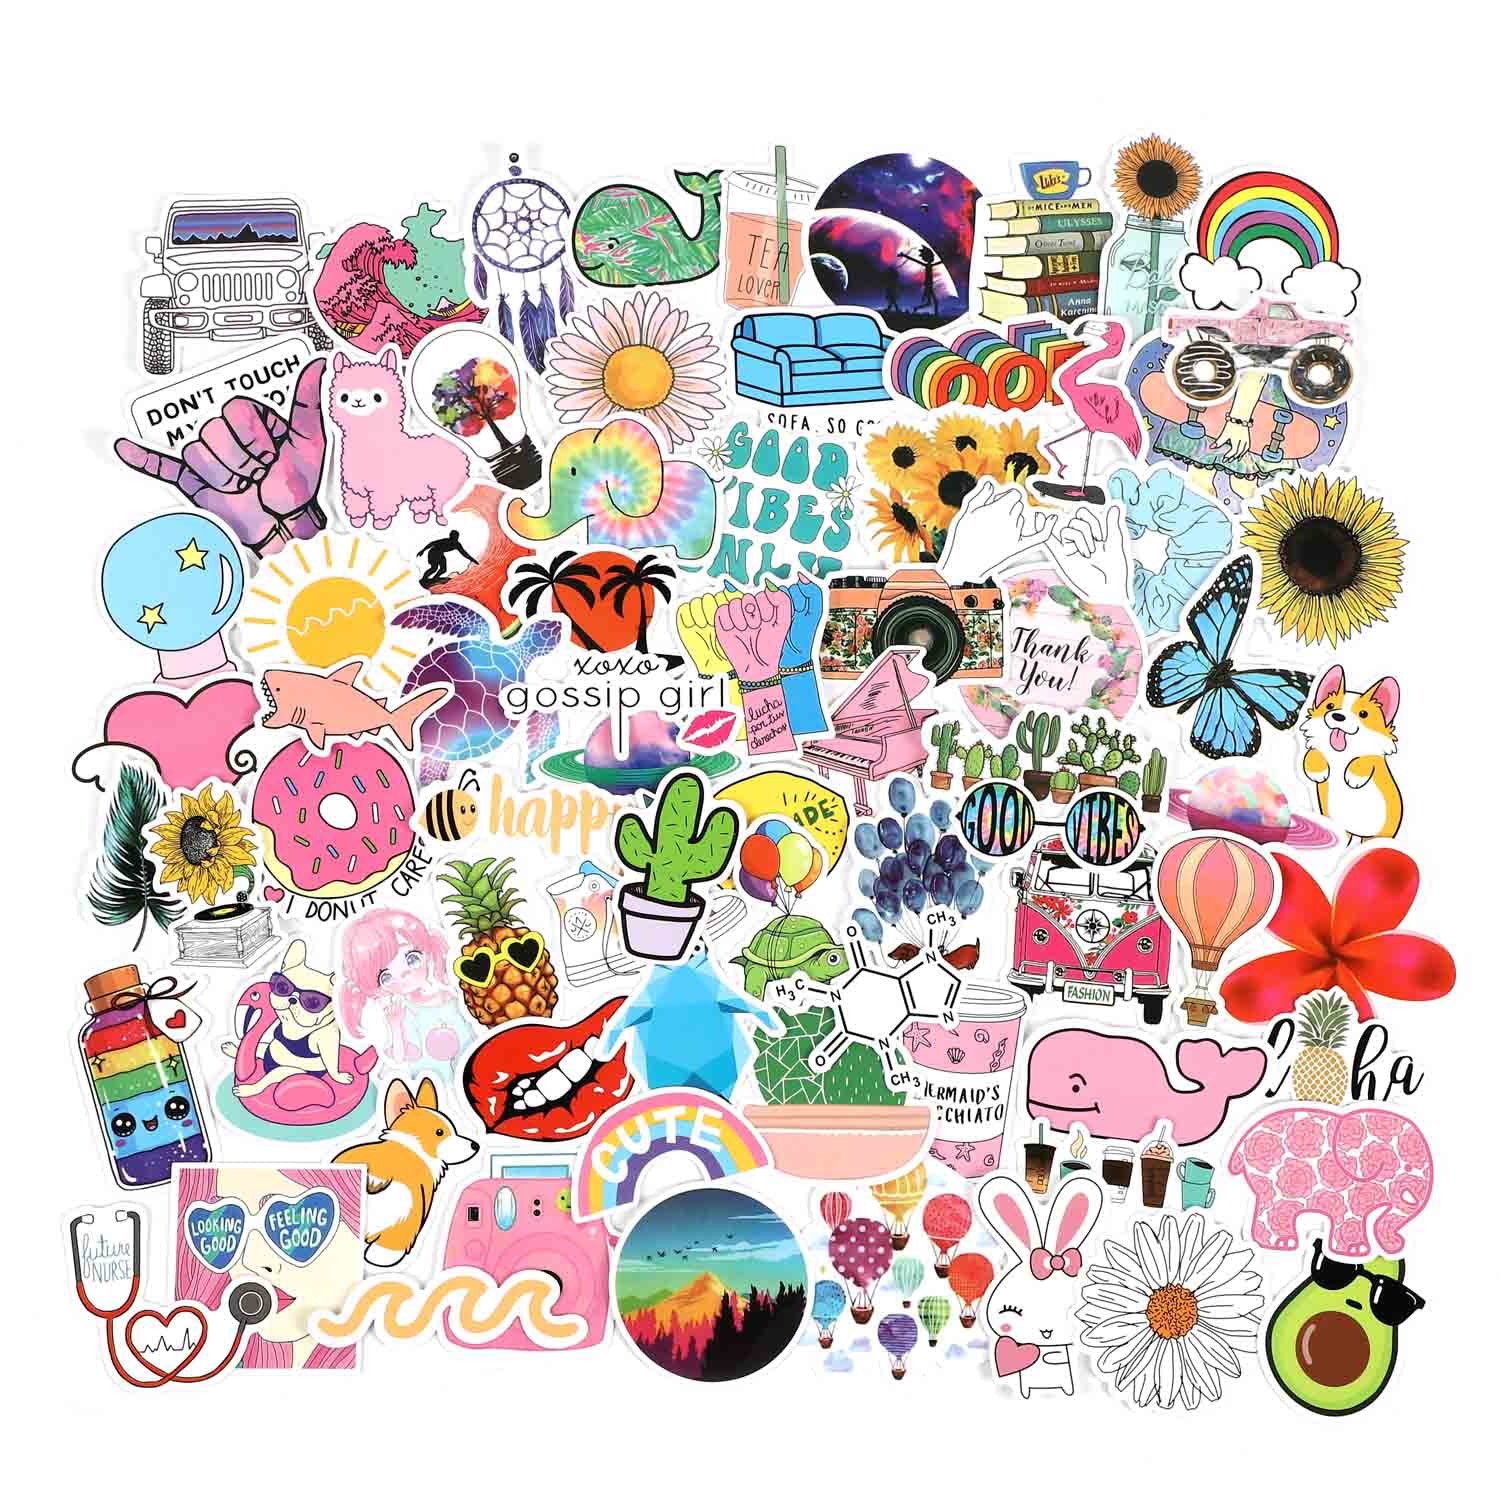 40pcs/lot Skateboard Stickers Bomb Vinyl Laptop Luggage Decals Sticker Removable 